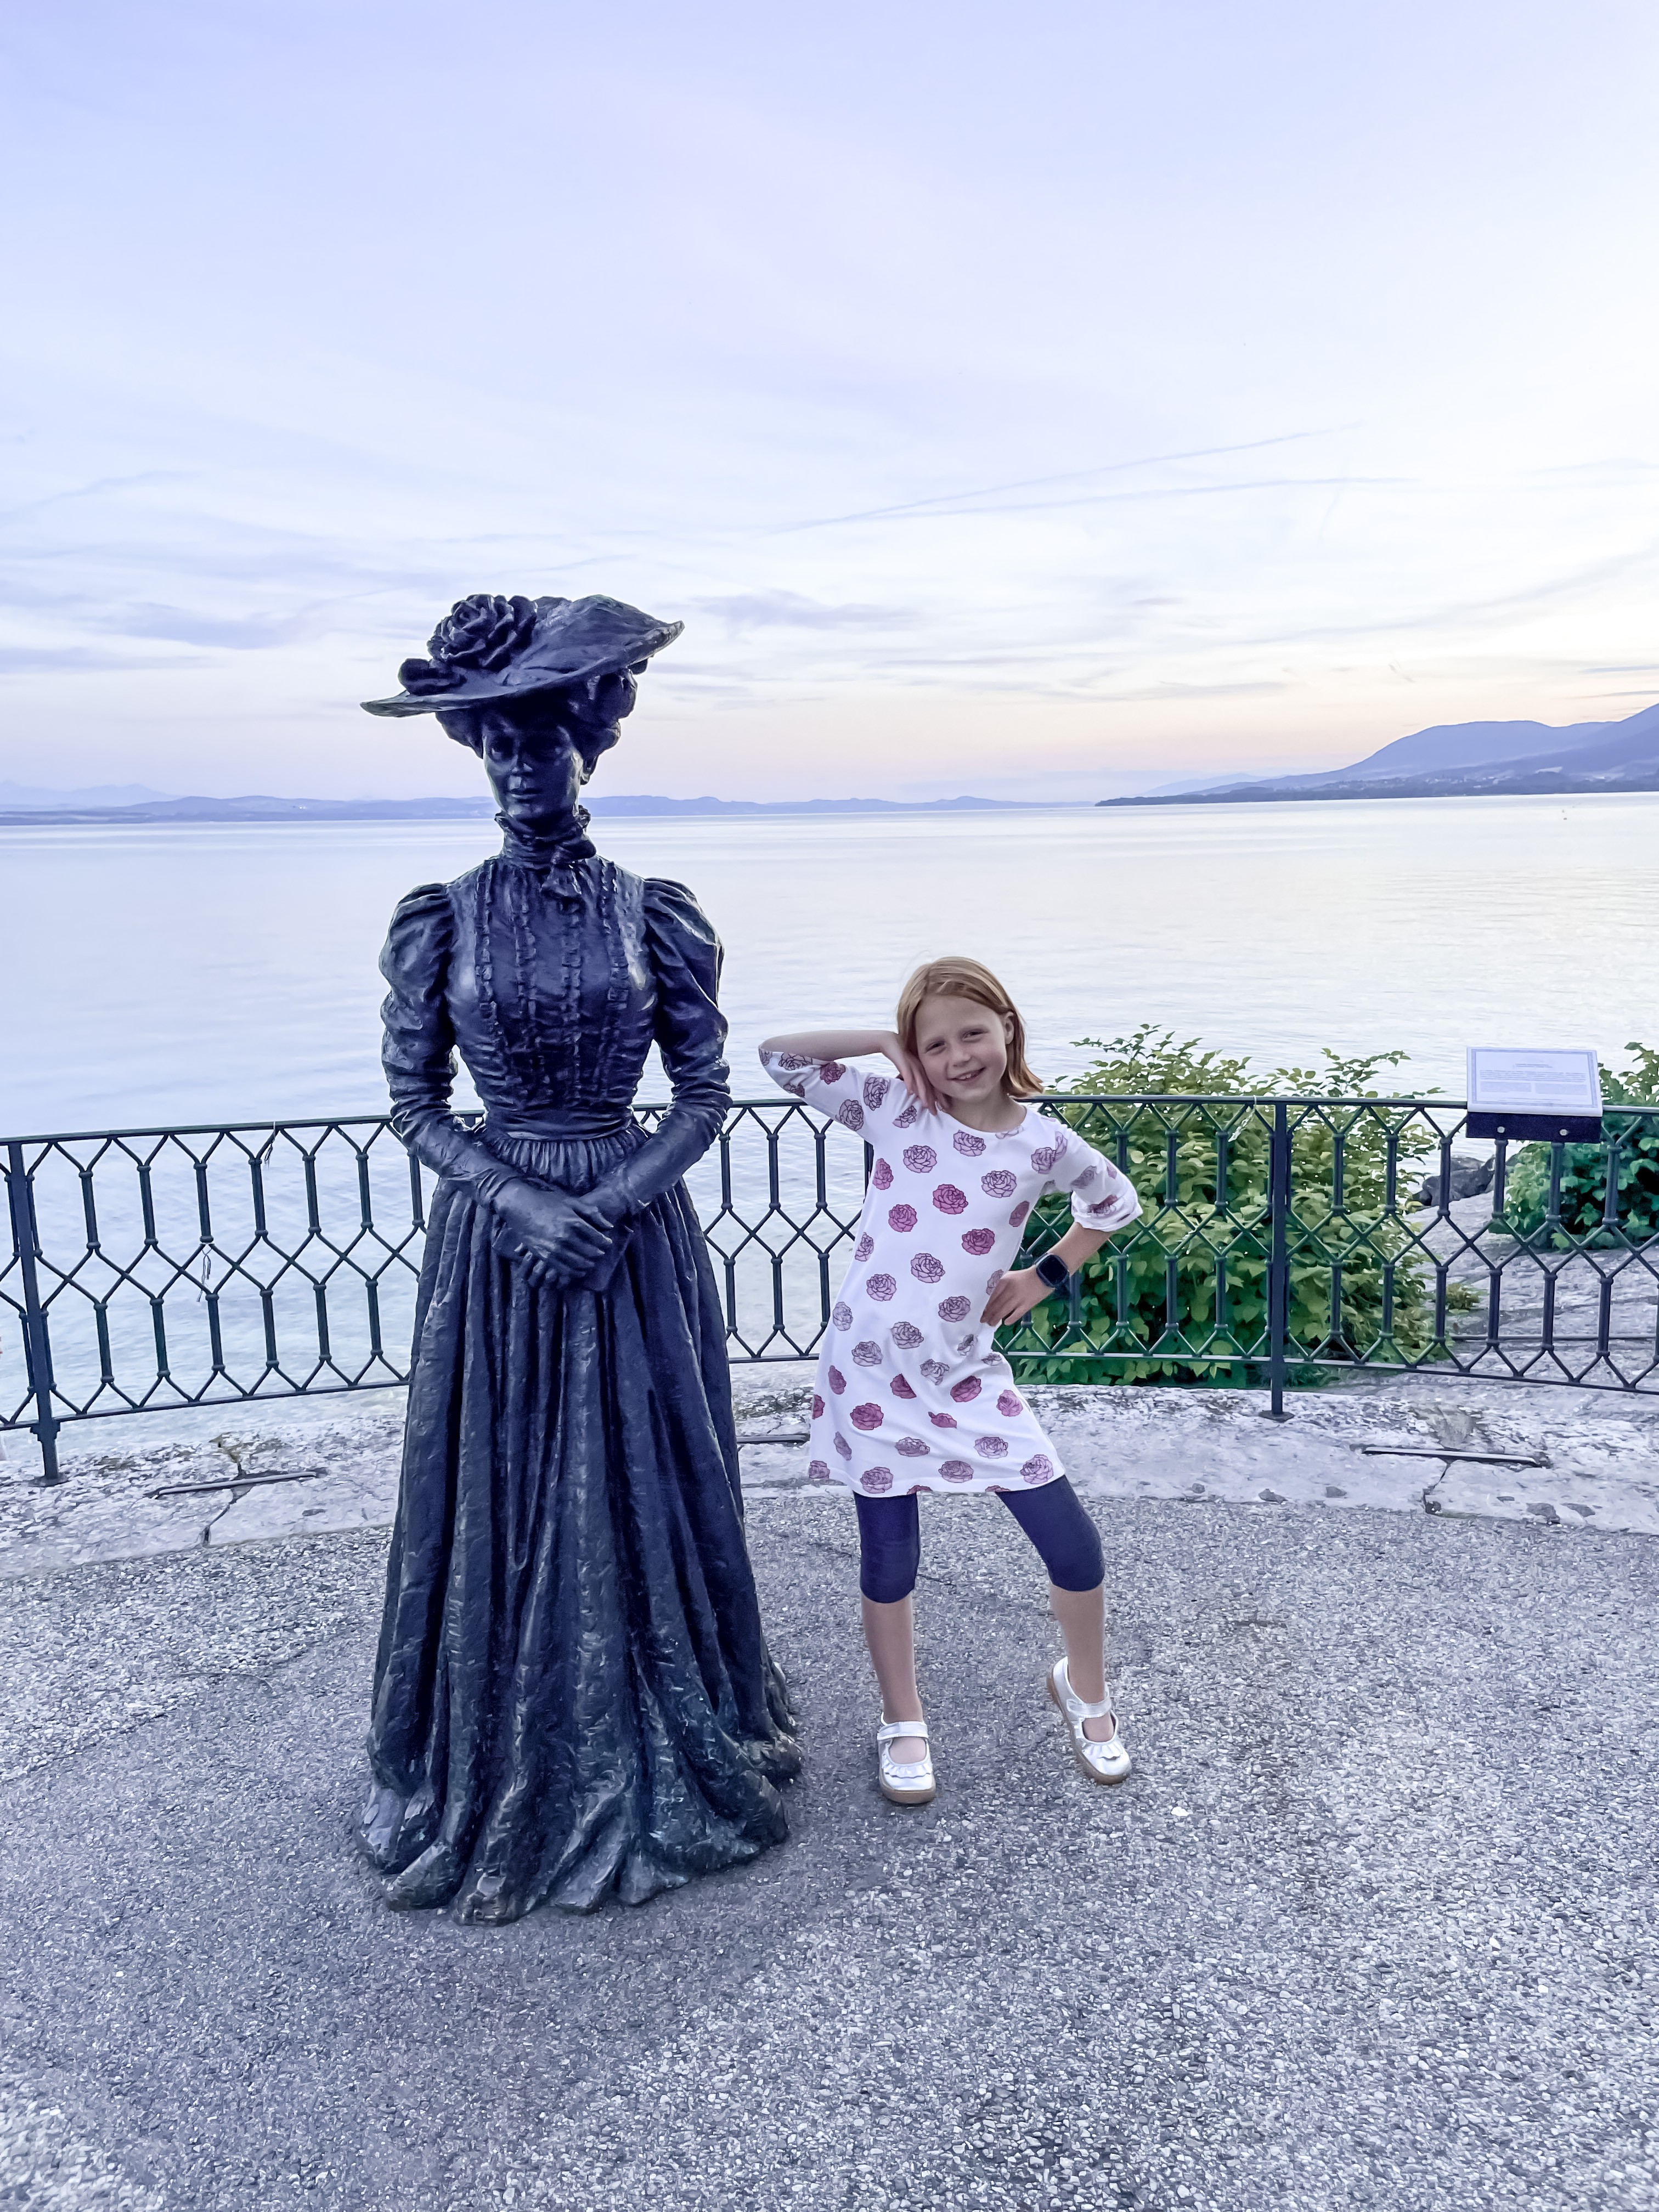 Lake Neuchâtel at Golden Hour - What is there to do in Neuchâtel with kids?